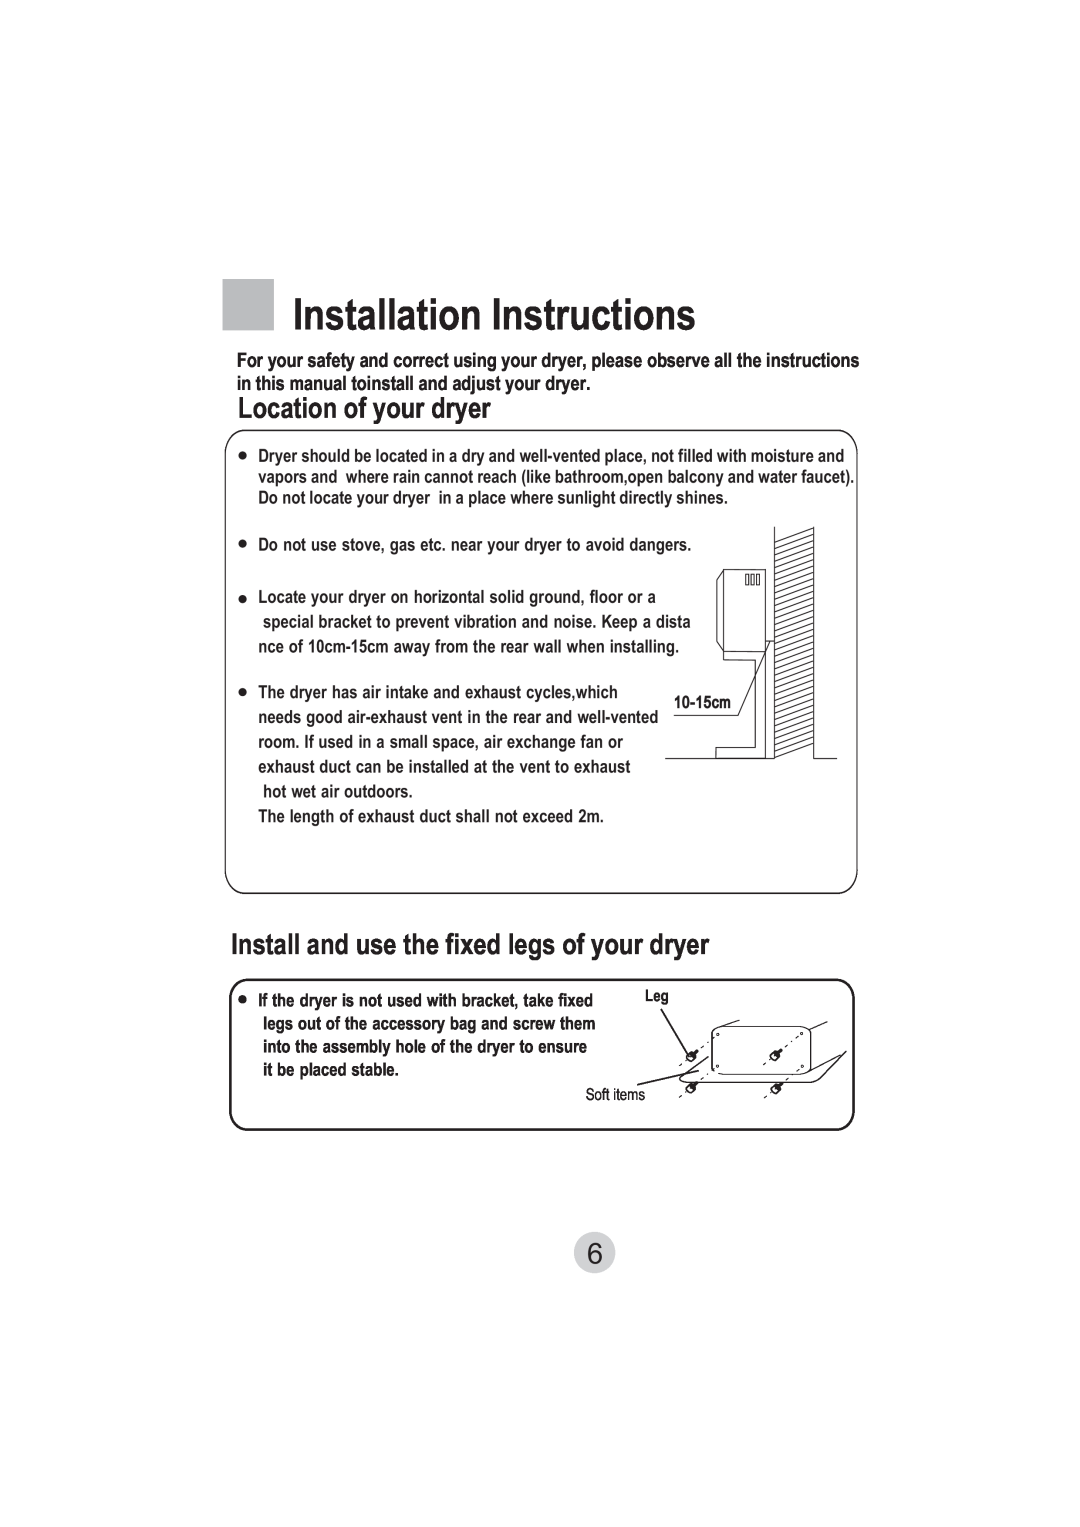 Technika T50DM manual Installation Instructions, Location of your dryer, Install and use the fixed legs of your dryer 